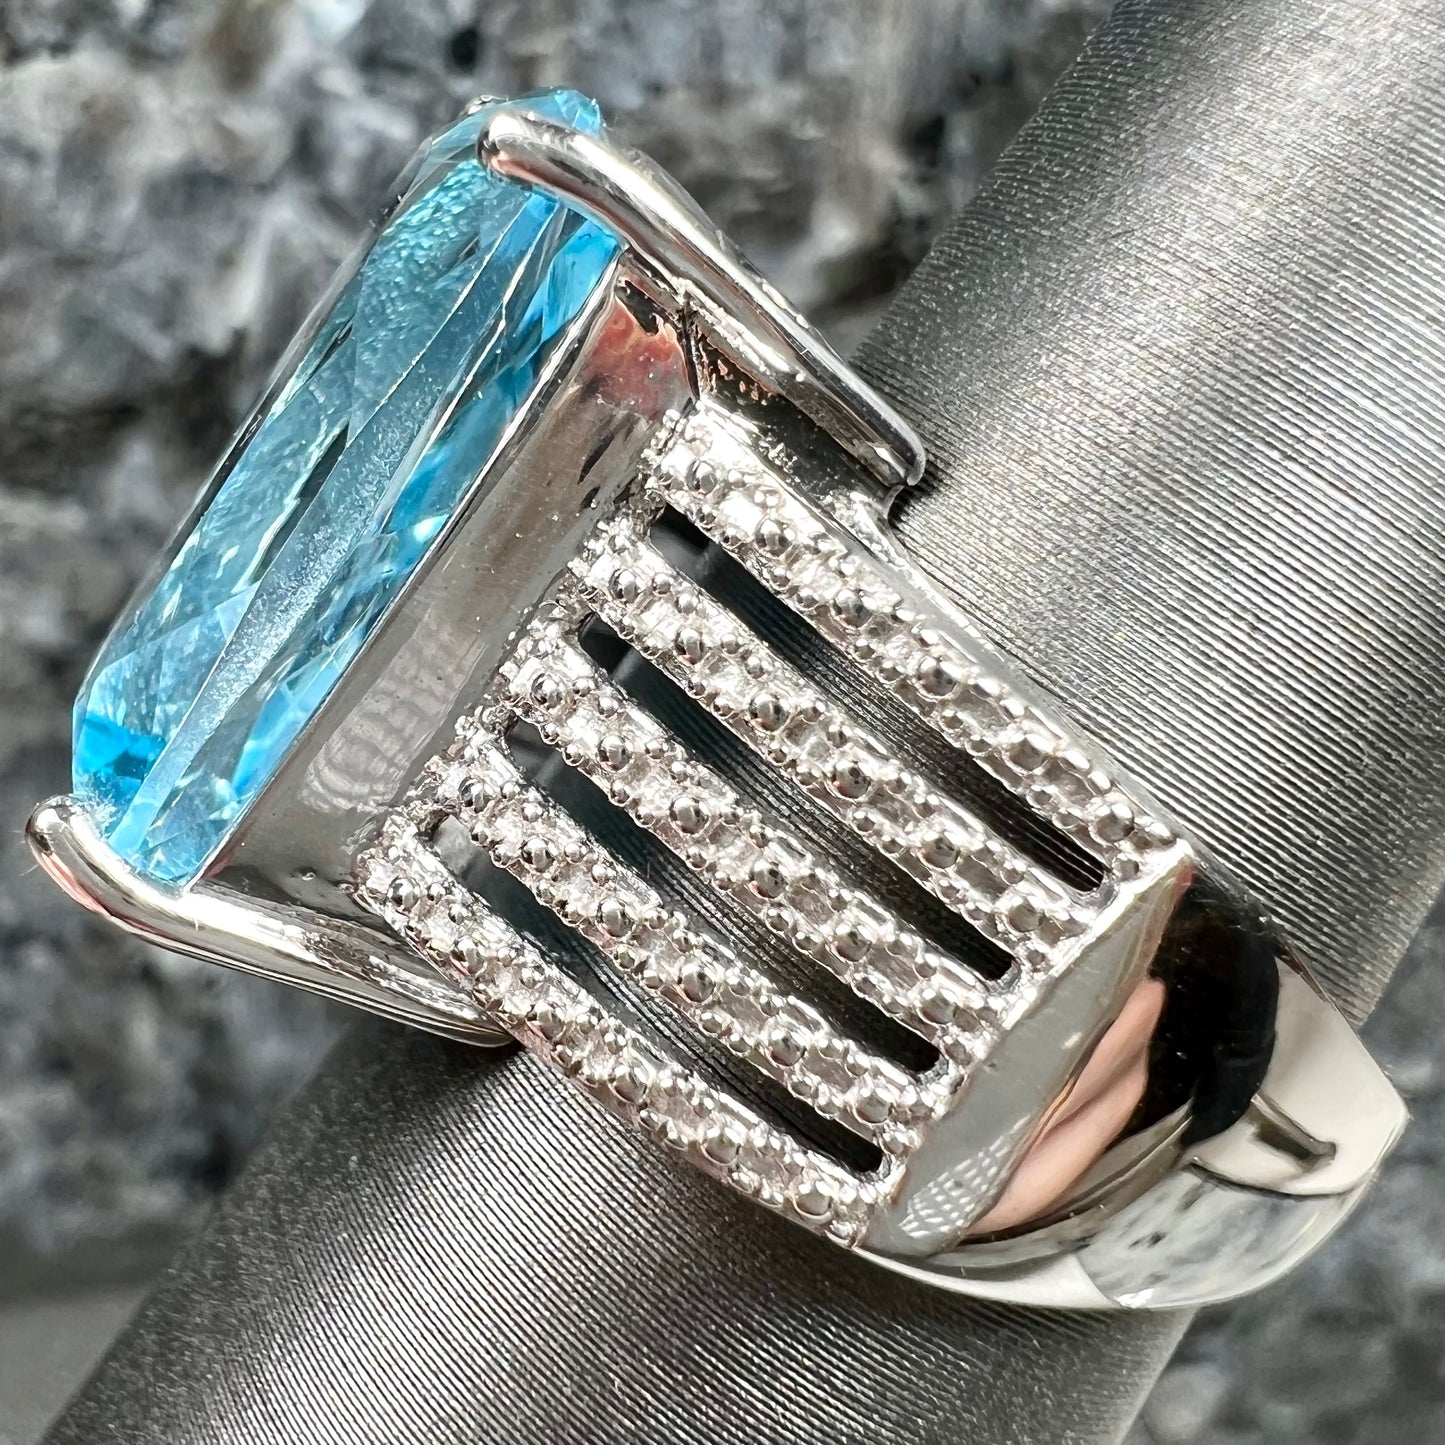 A sterling silver ring prong set with a large, cushion cut sky blue topaz stone.  The shank has been textured to mimic accent stones.